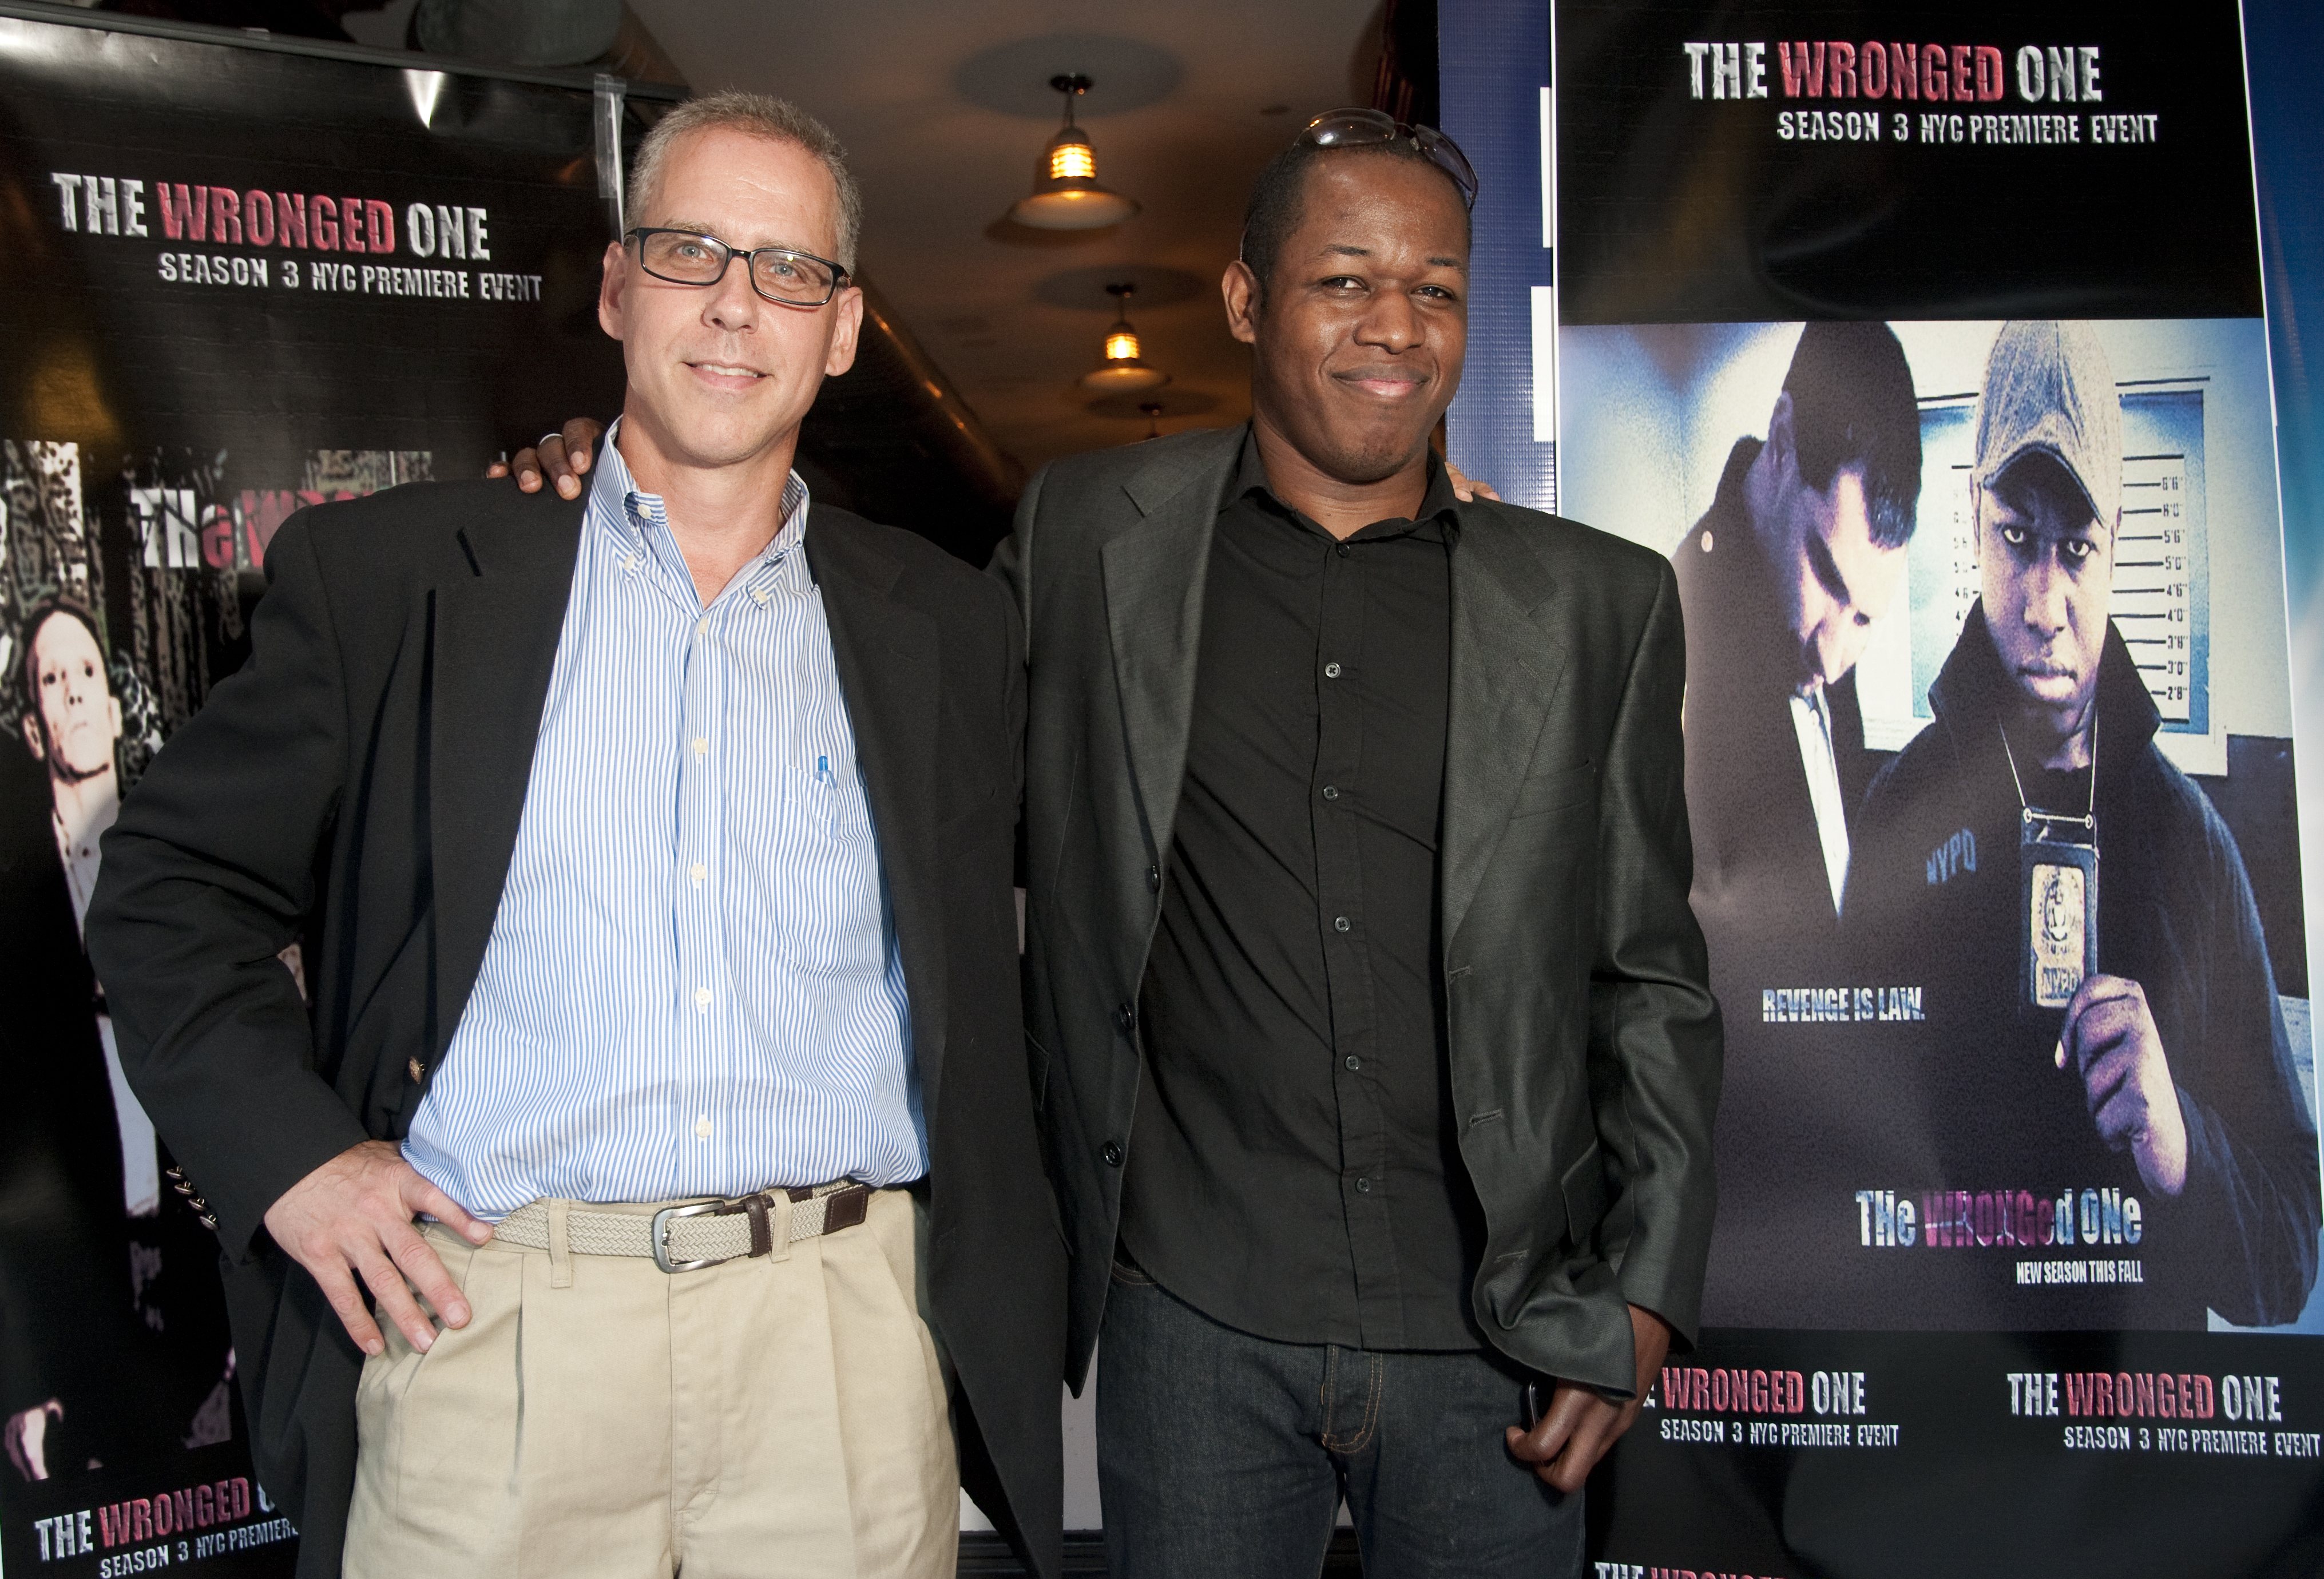 The Wronged One New York premiere.